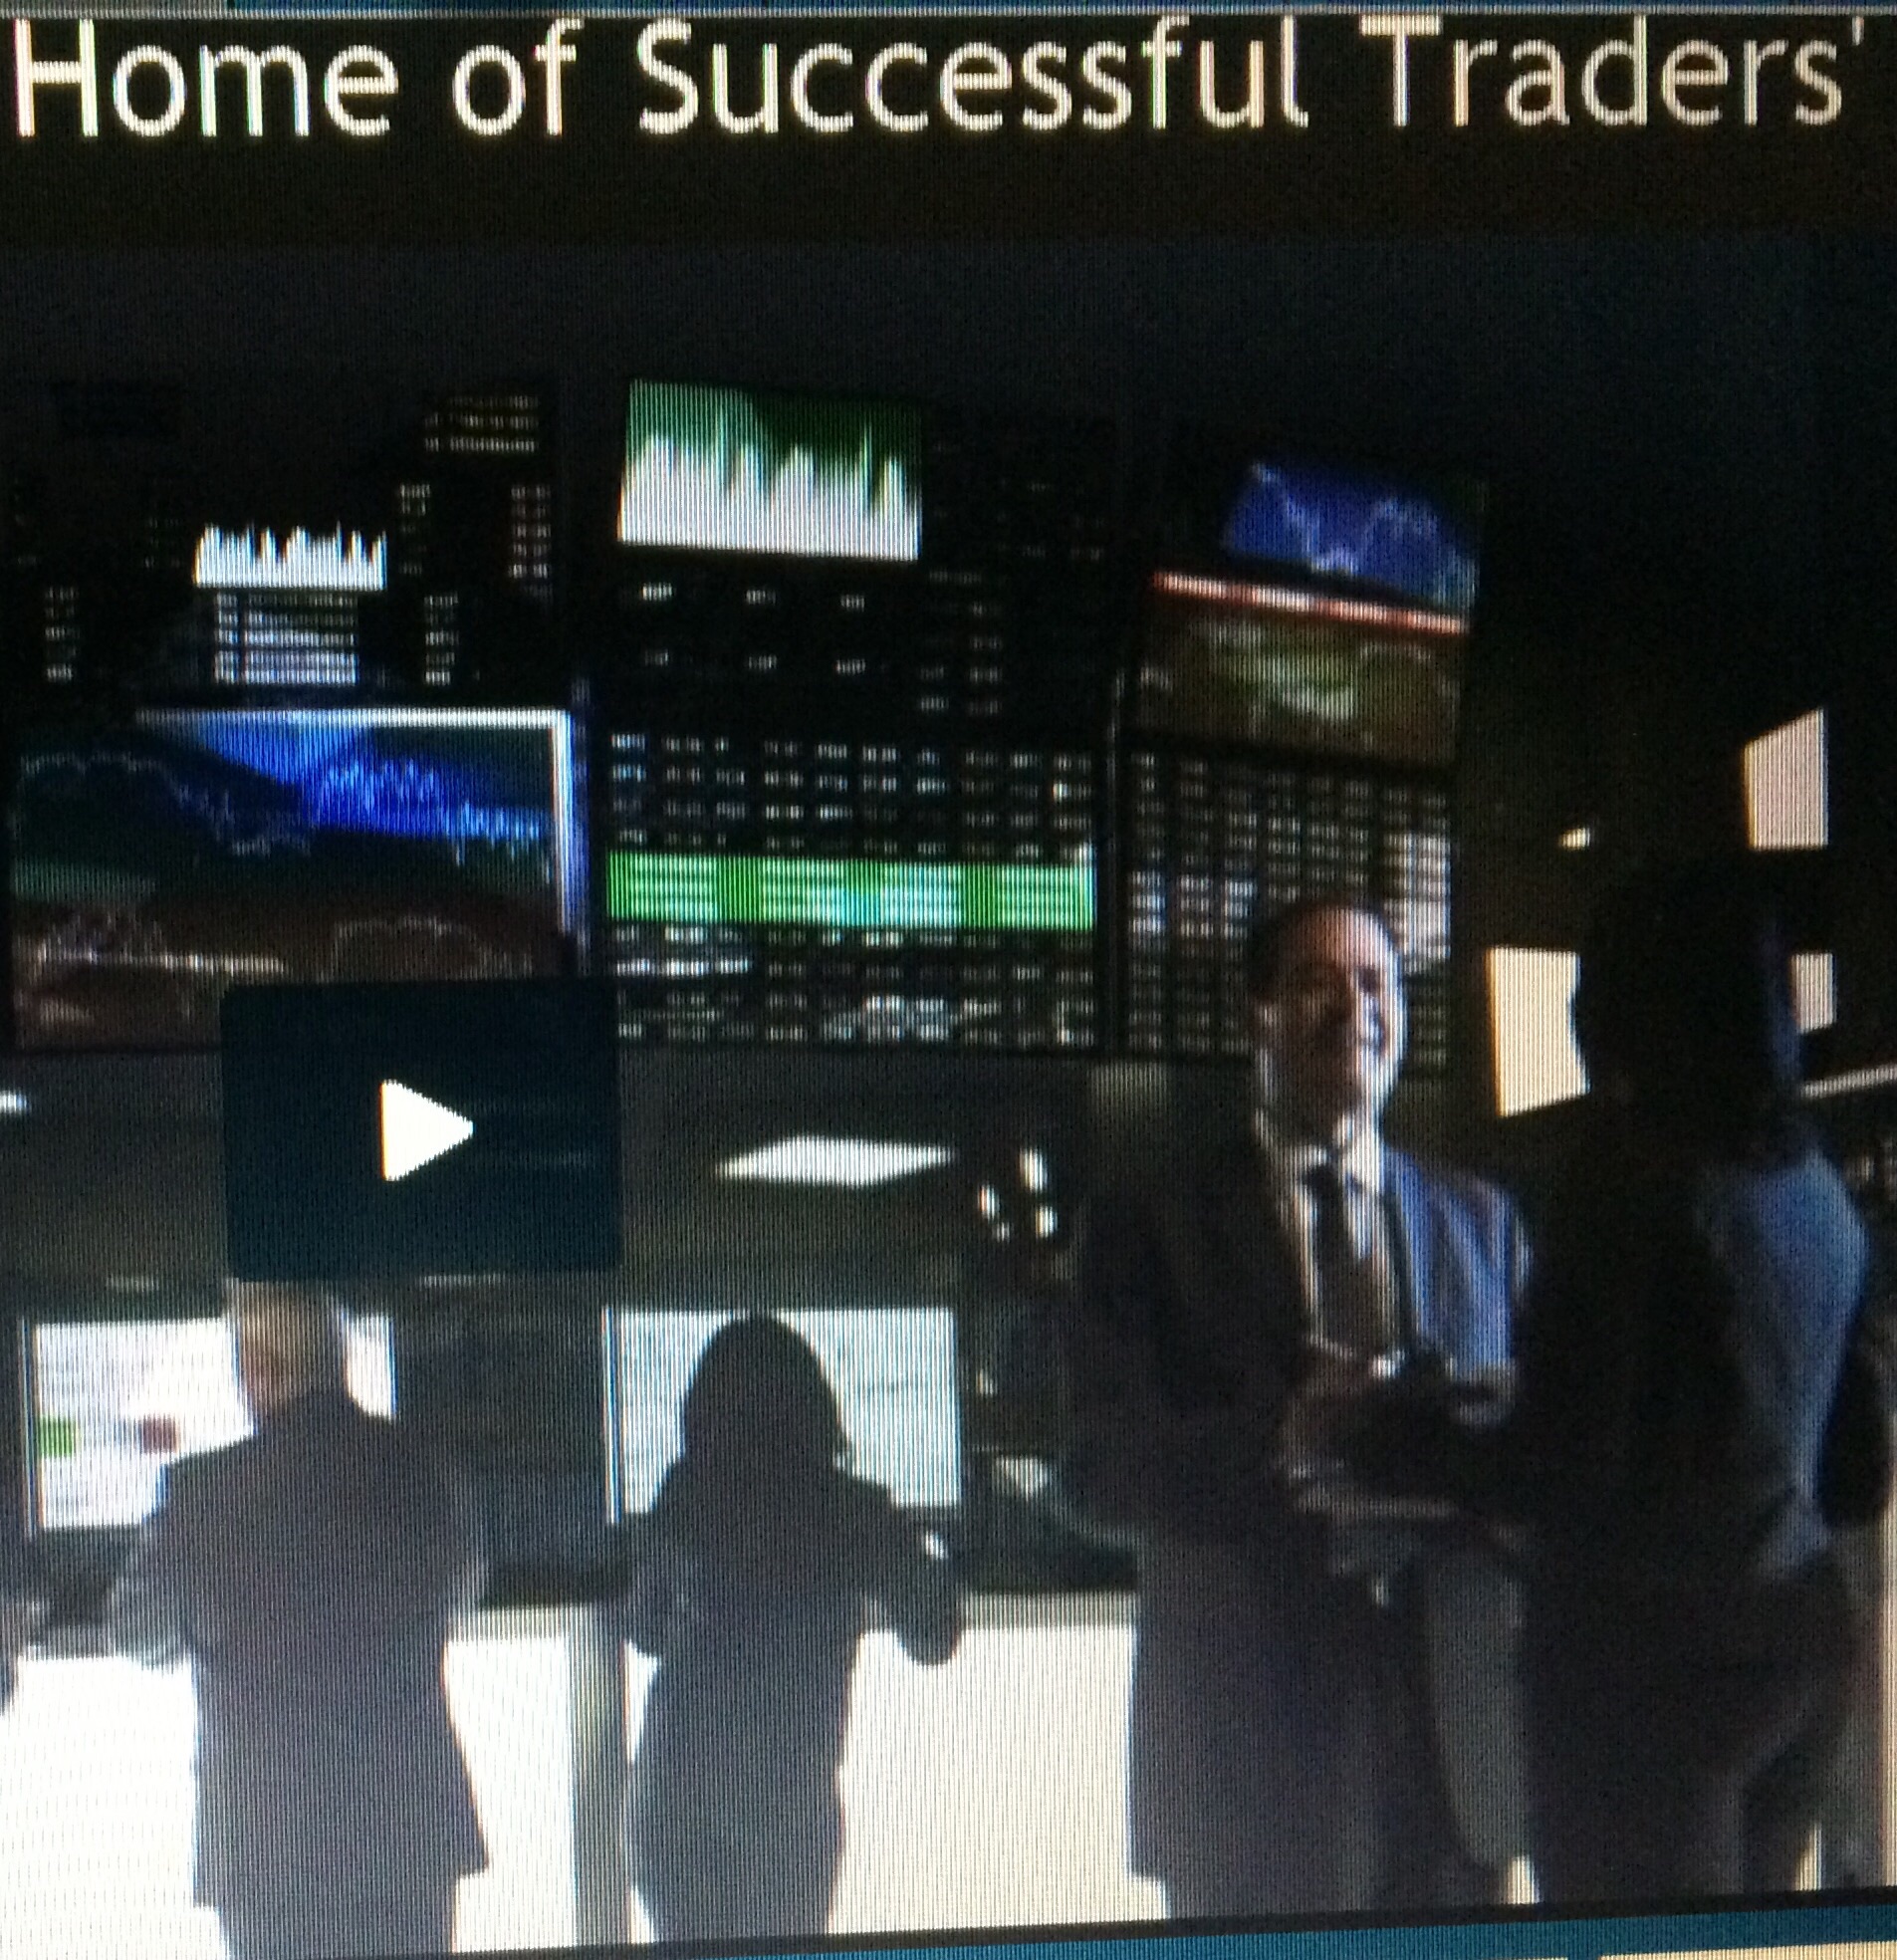 esignal Commercial seen on CNBC. That's me on the right talking with another 